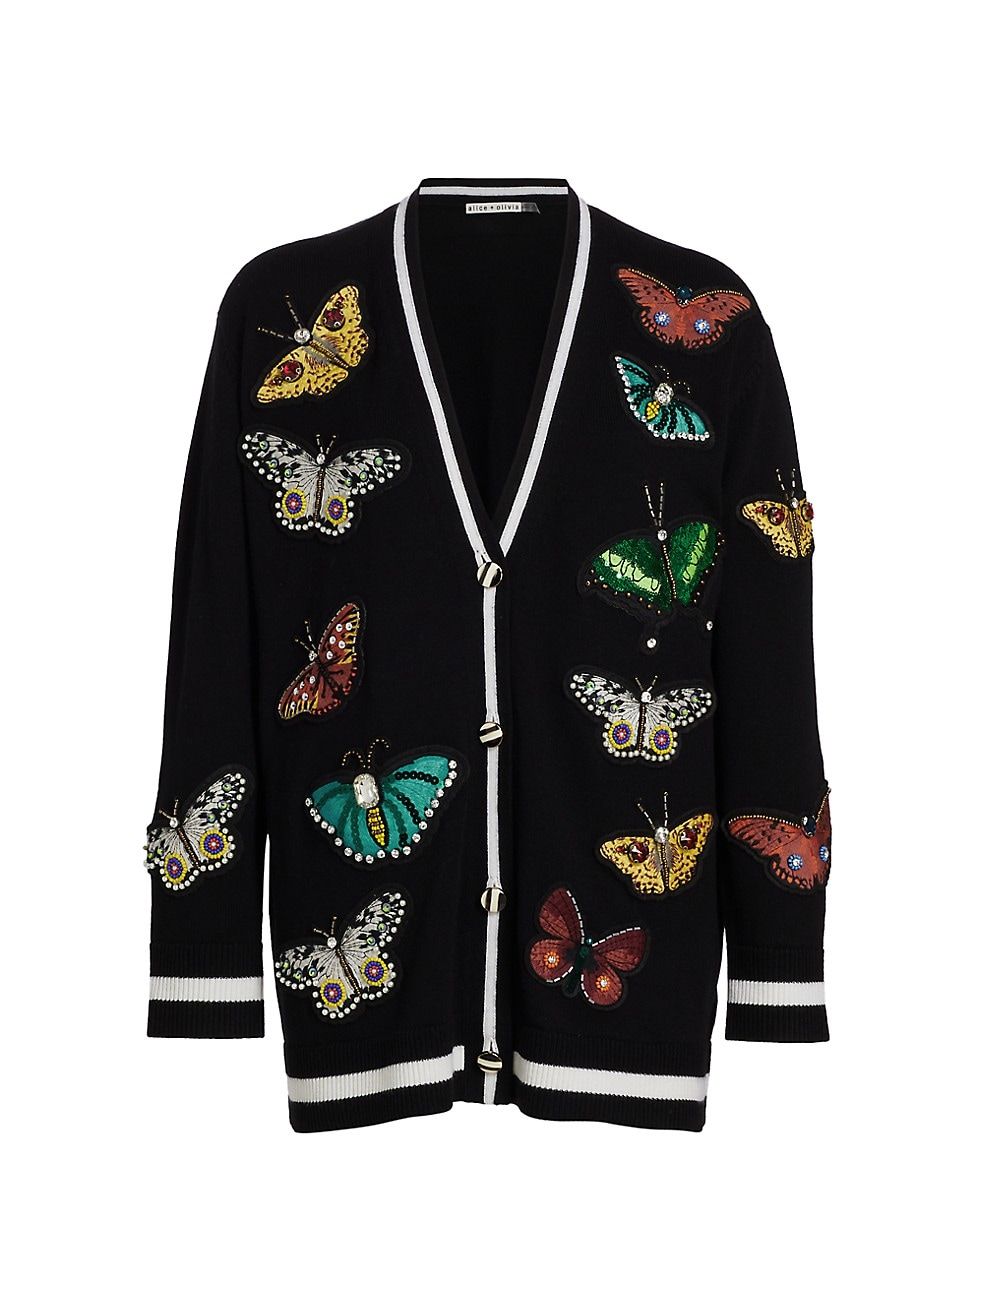 Alice + Olivia Bradford Butterfly Embroidered Cardigan | Saks Fifth Avenue